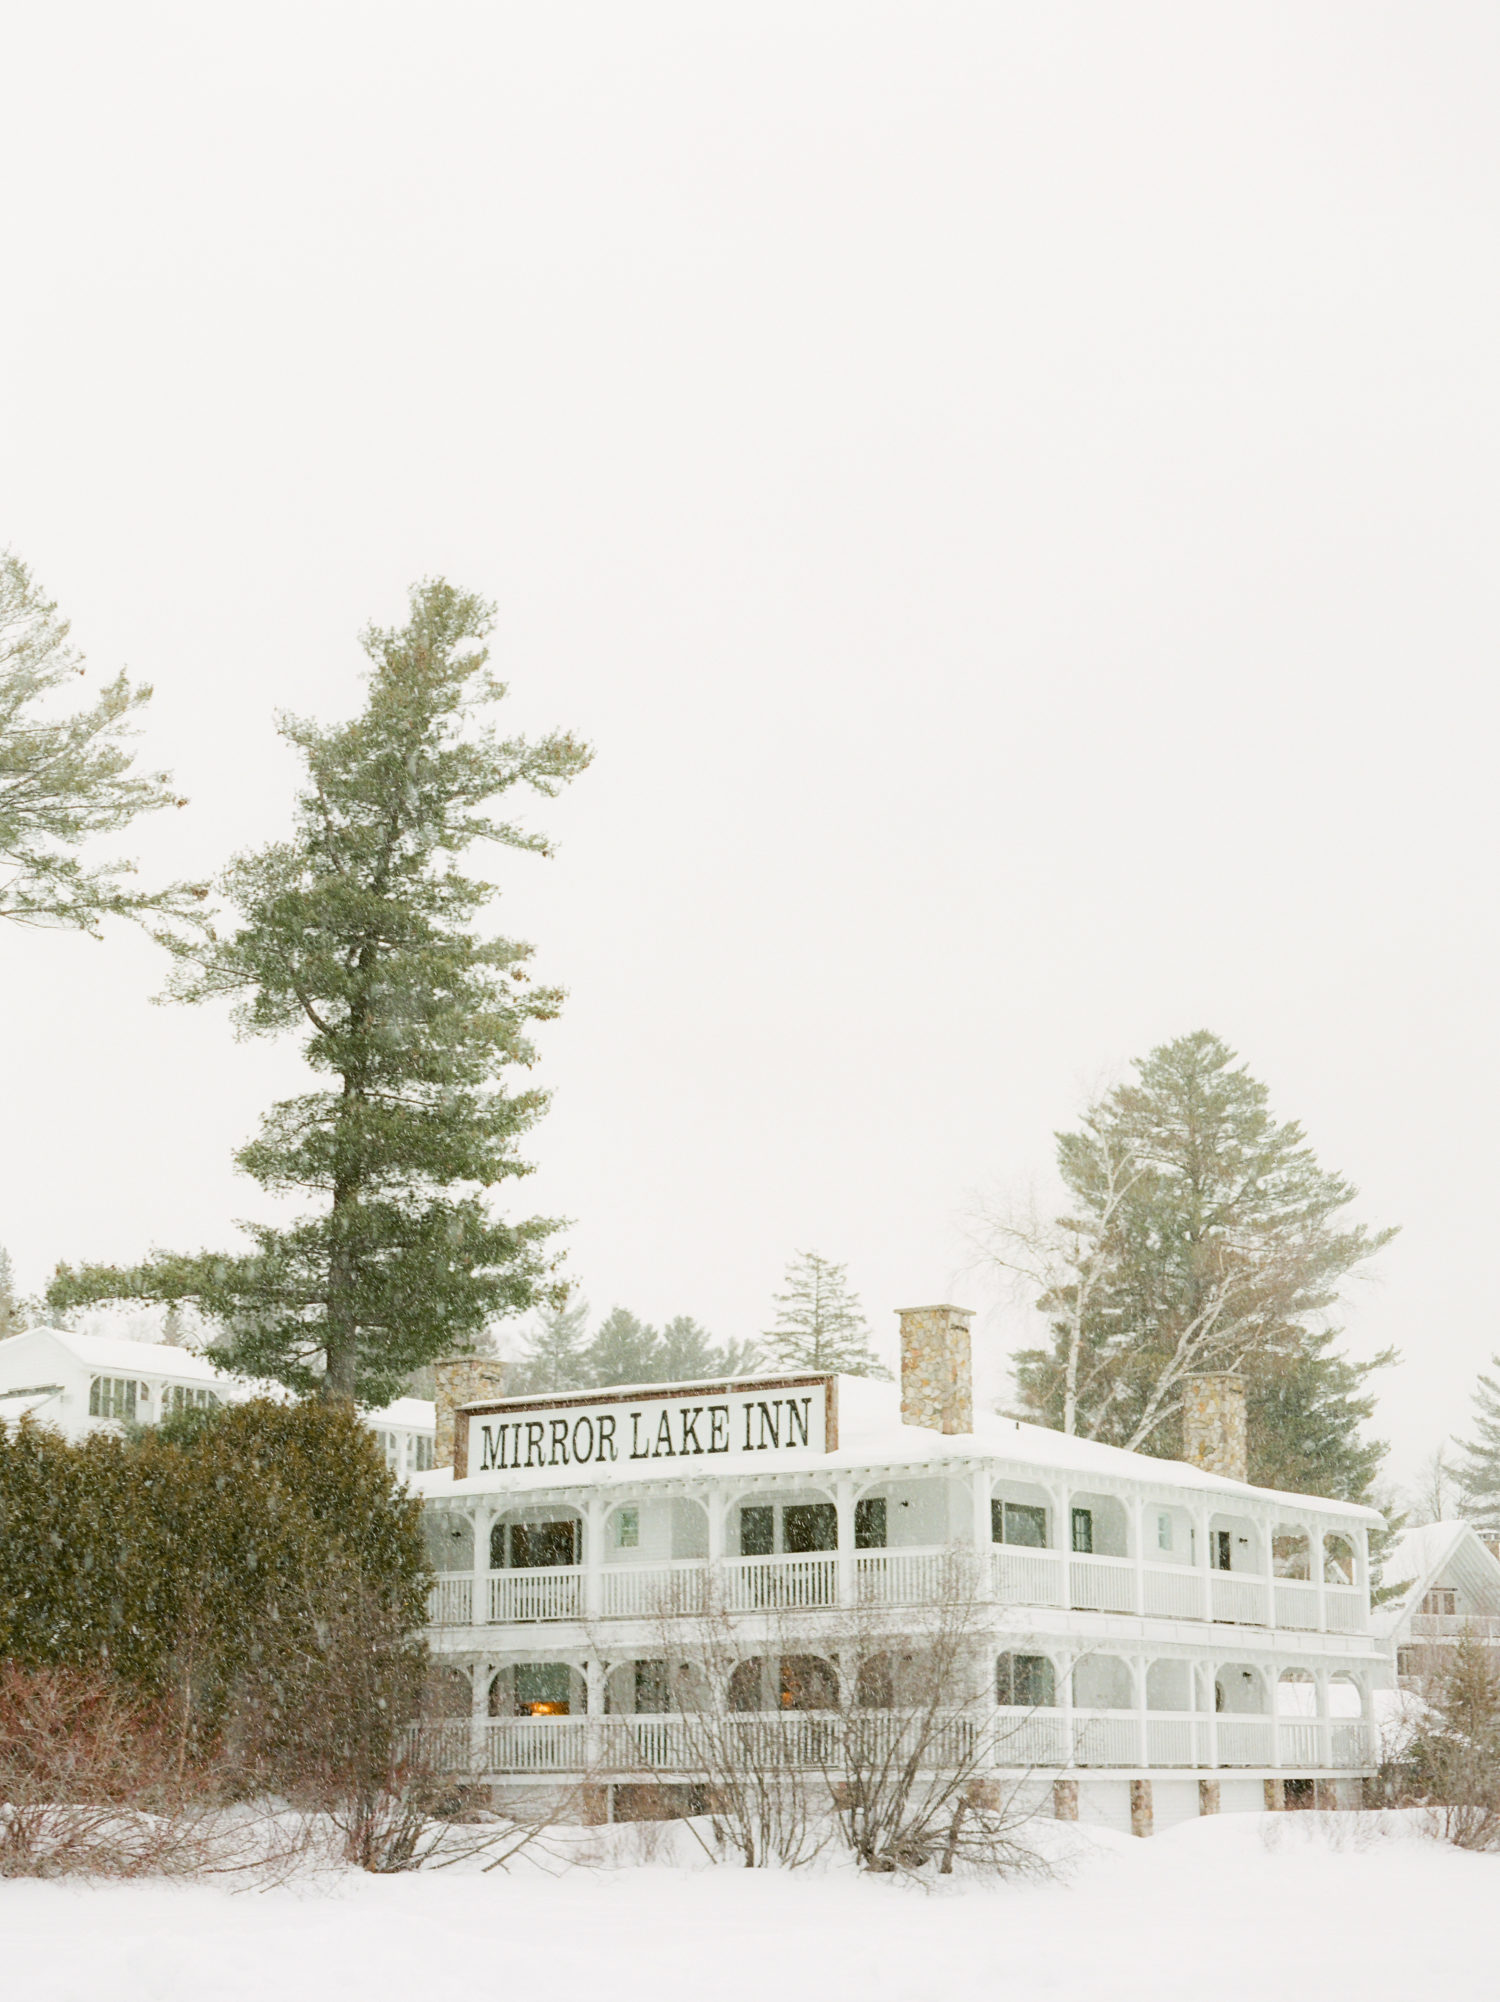 Mirror Lake Inn with snow falling photographed from the frozen lake during winter. Photograph by Mary Dougherty